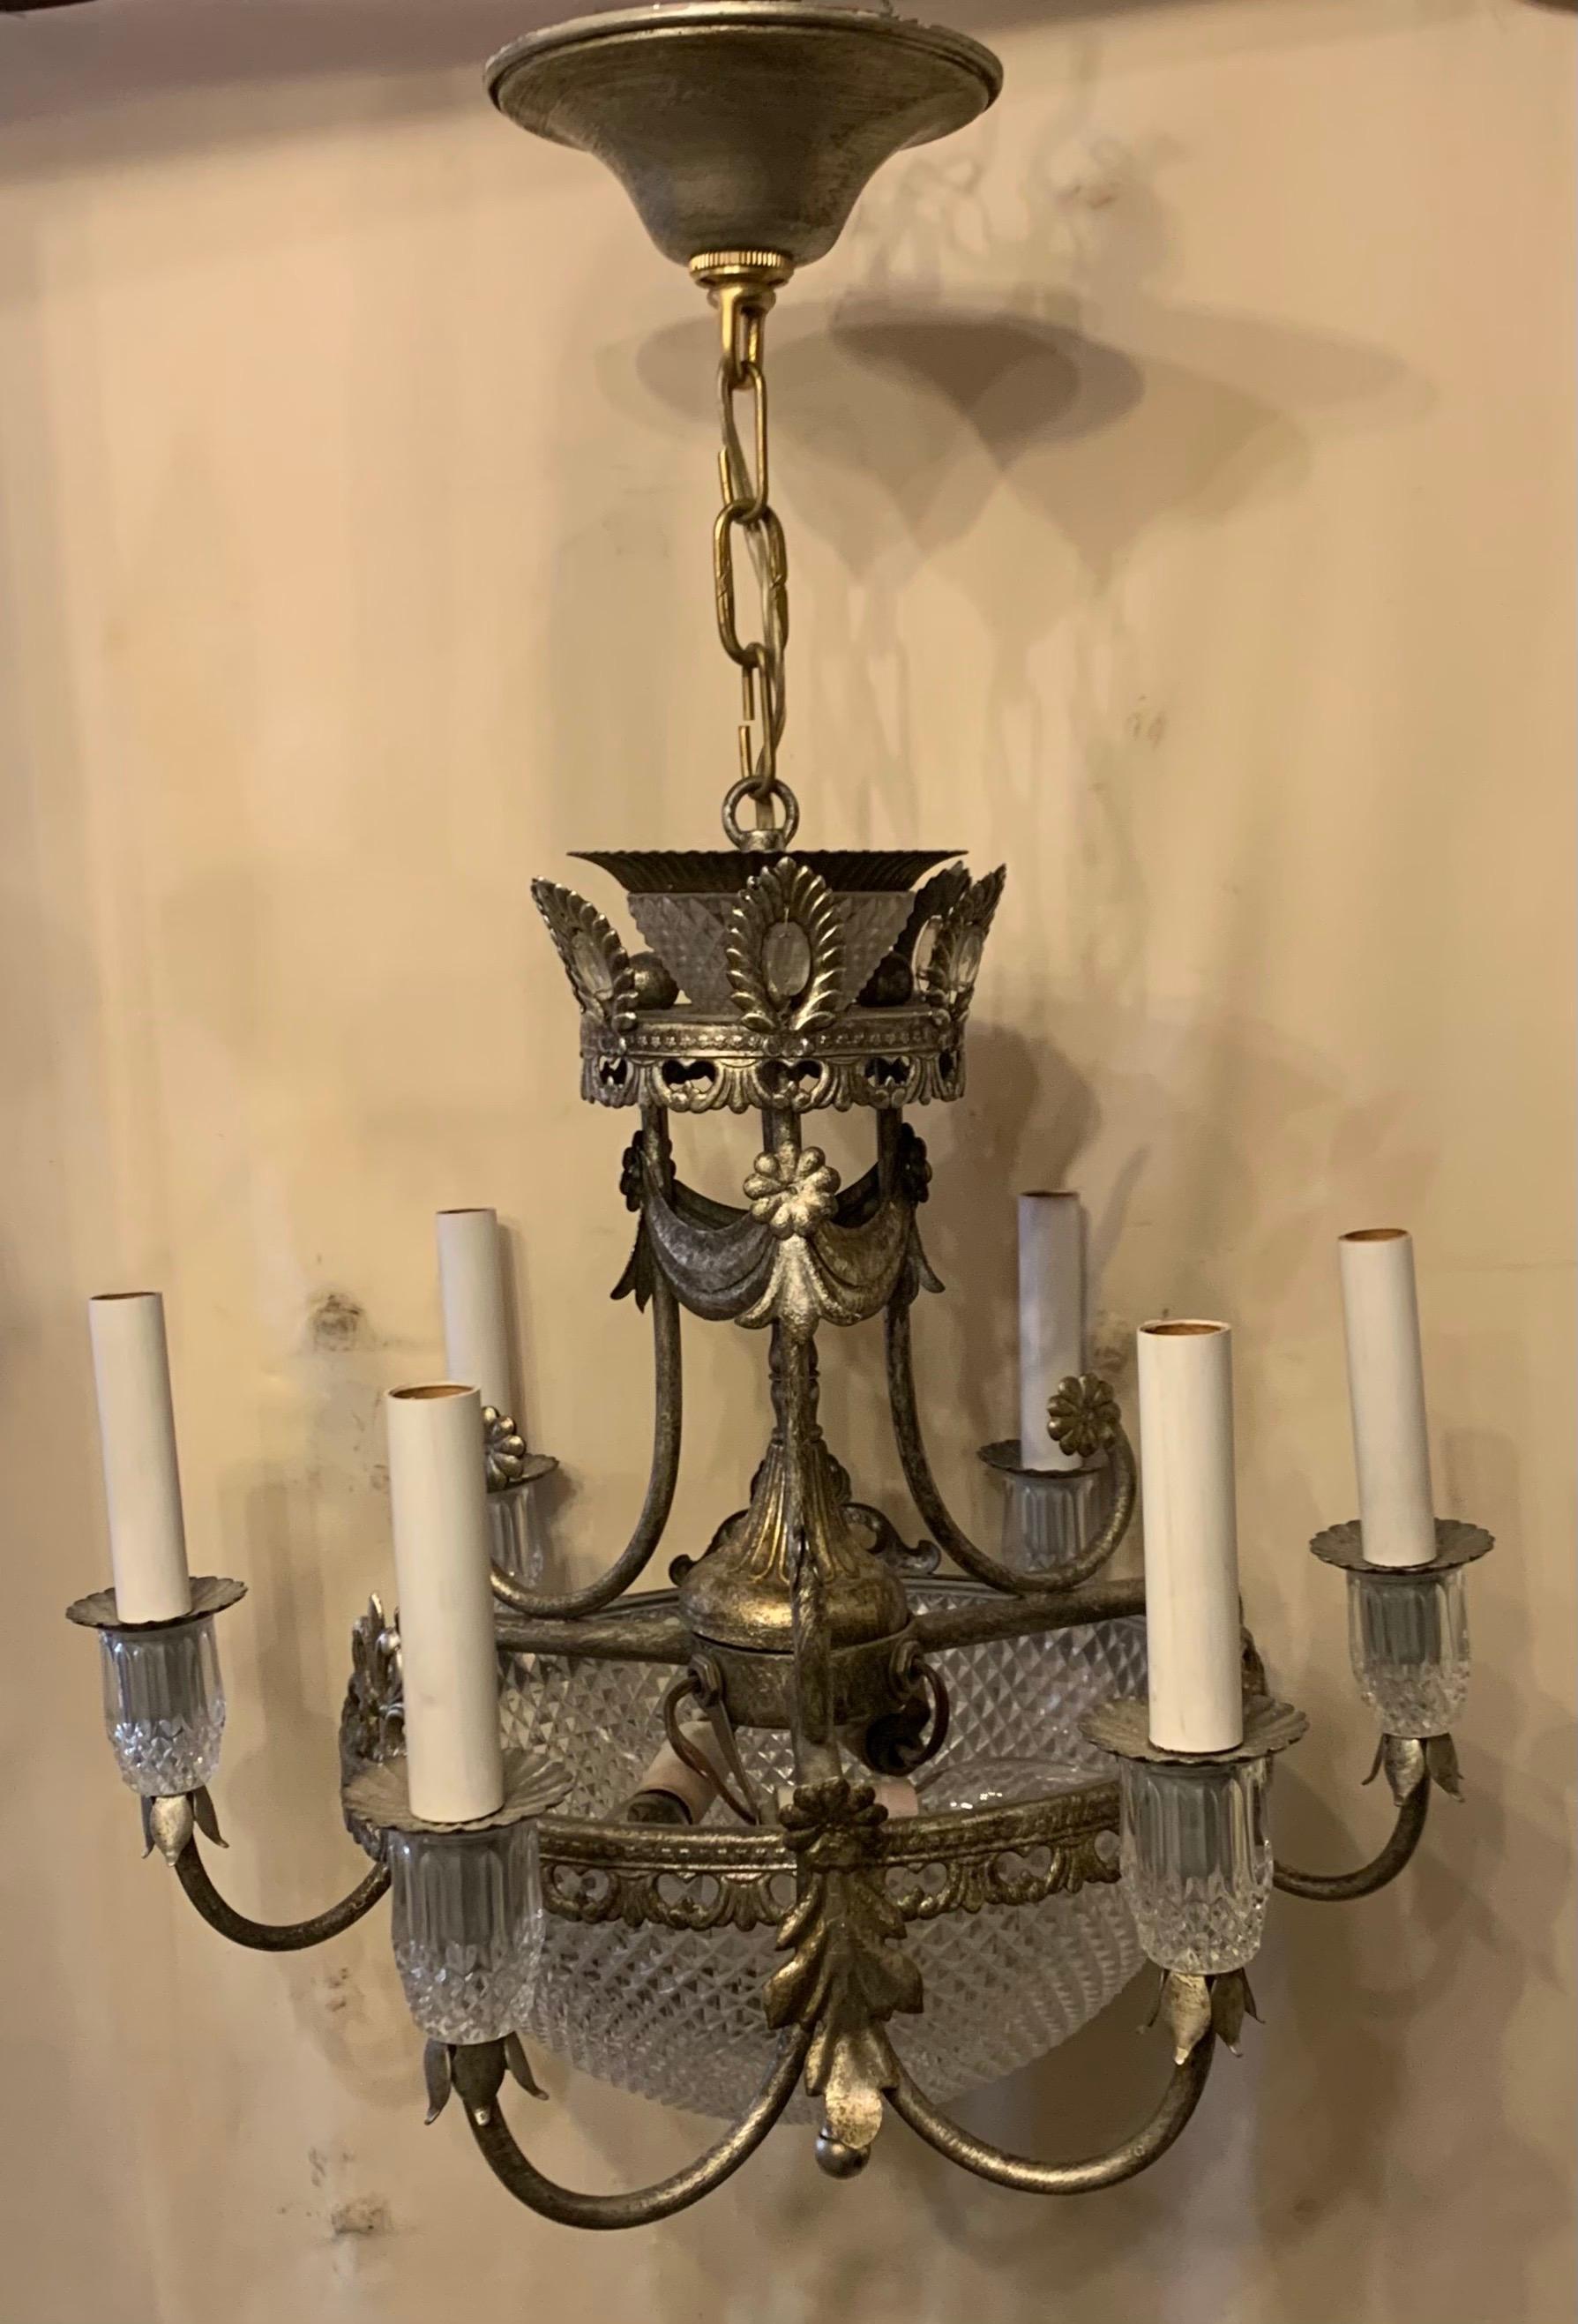 A wonderful silver gilt tole cut crystal / glass bowl basket form chandelier fixture, outfitted with 6 arms and three lights inside each center bowl.
 